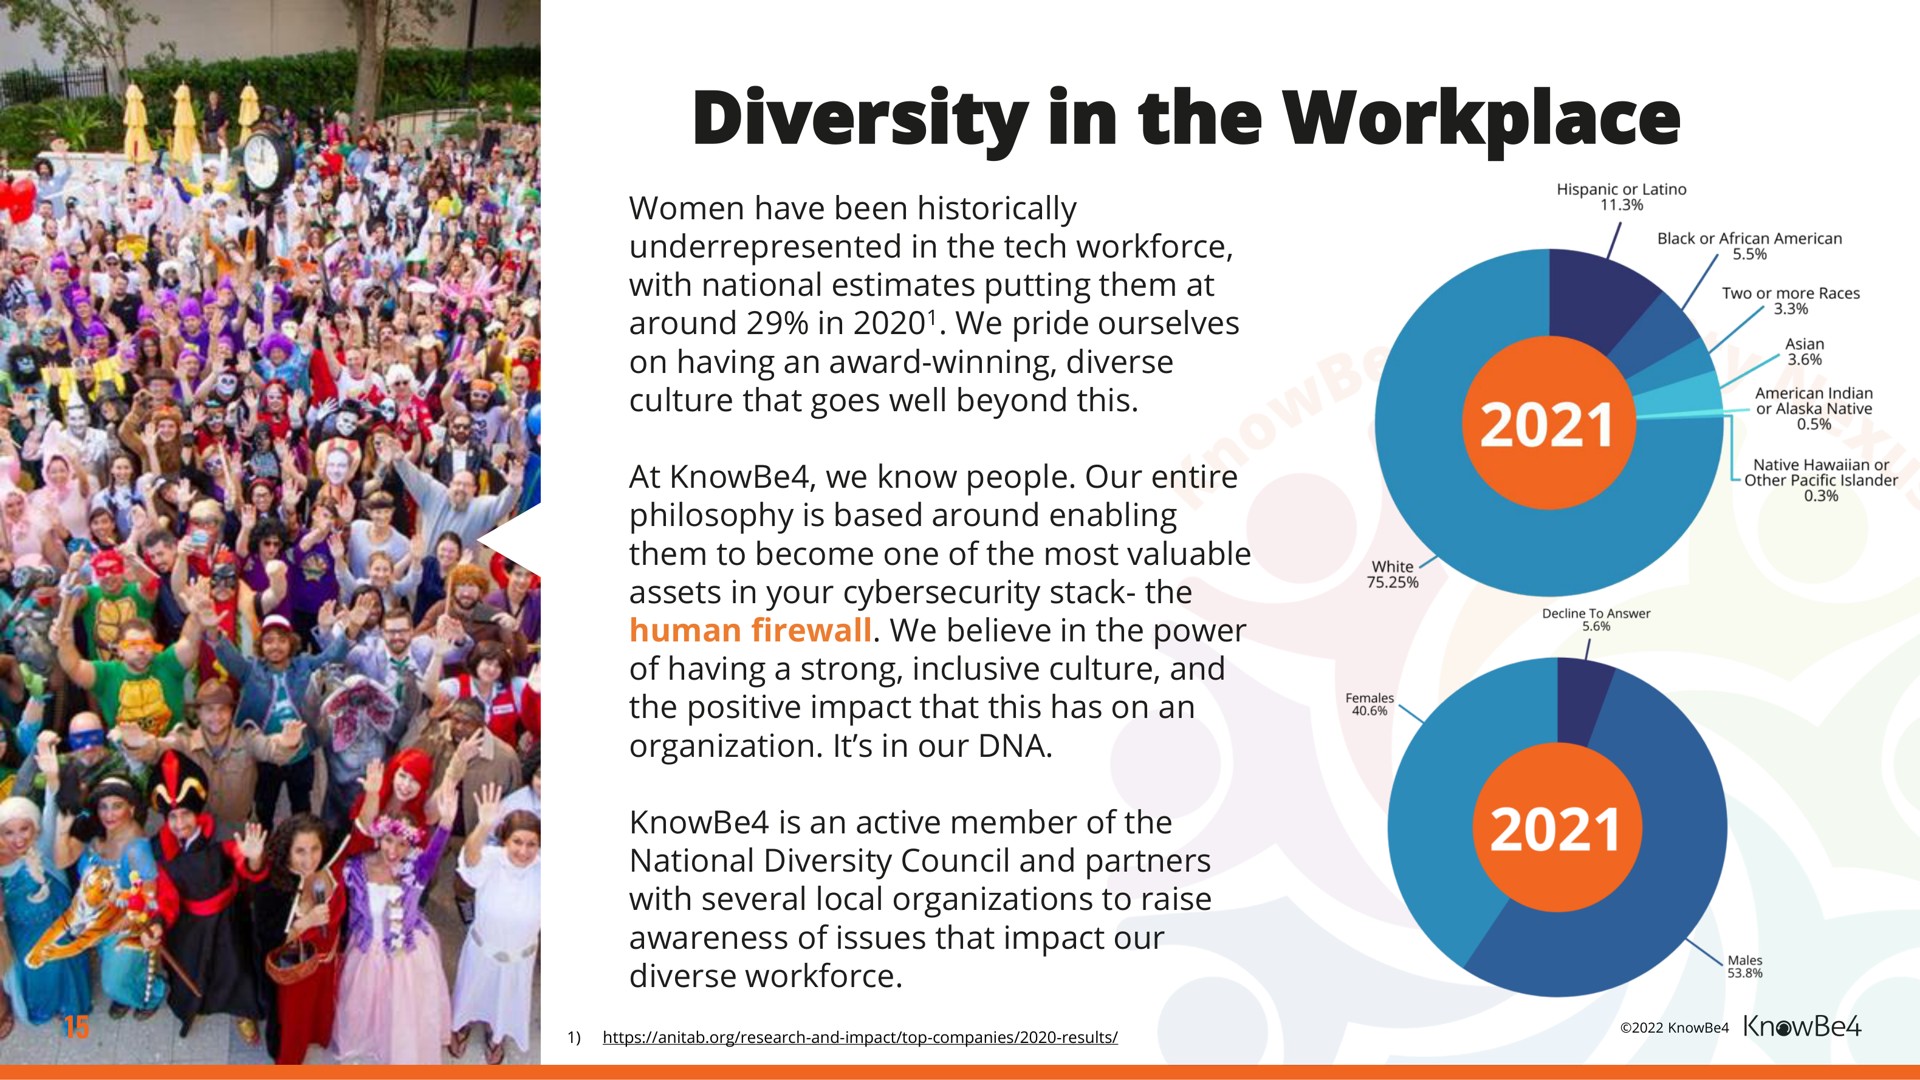 diversity in the workplace | KnowBe4